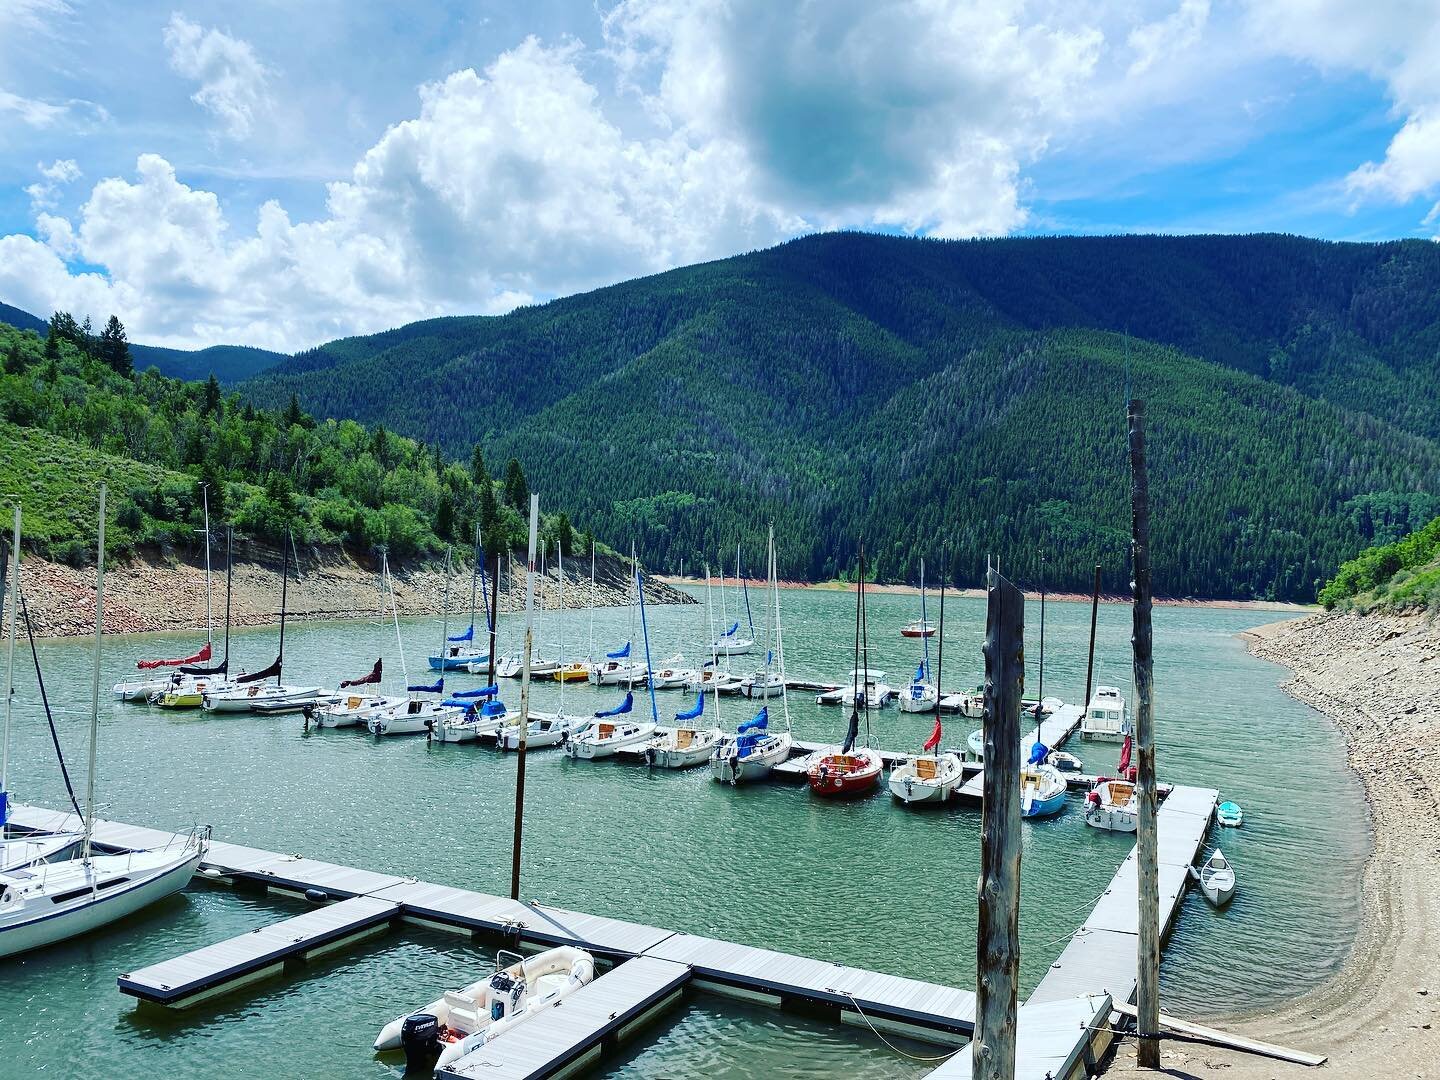 Sailed through the Colorado Rocky Mountains and cool Ruedi Reservoir waters this summer during our summer vacay #lakesailing #aspenyachtclub #ruedireservoir #sailaspen